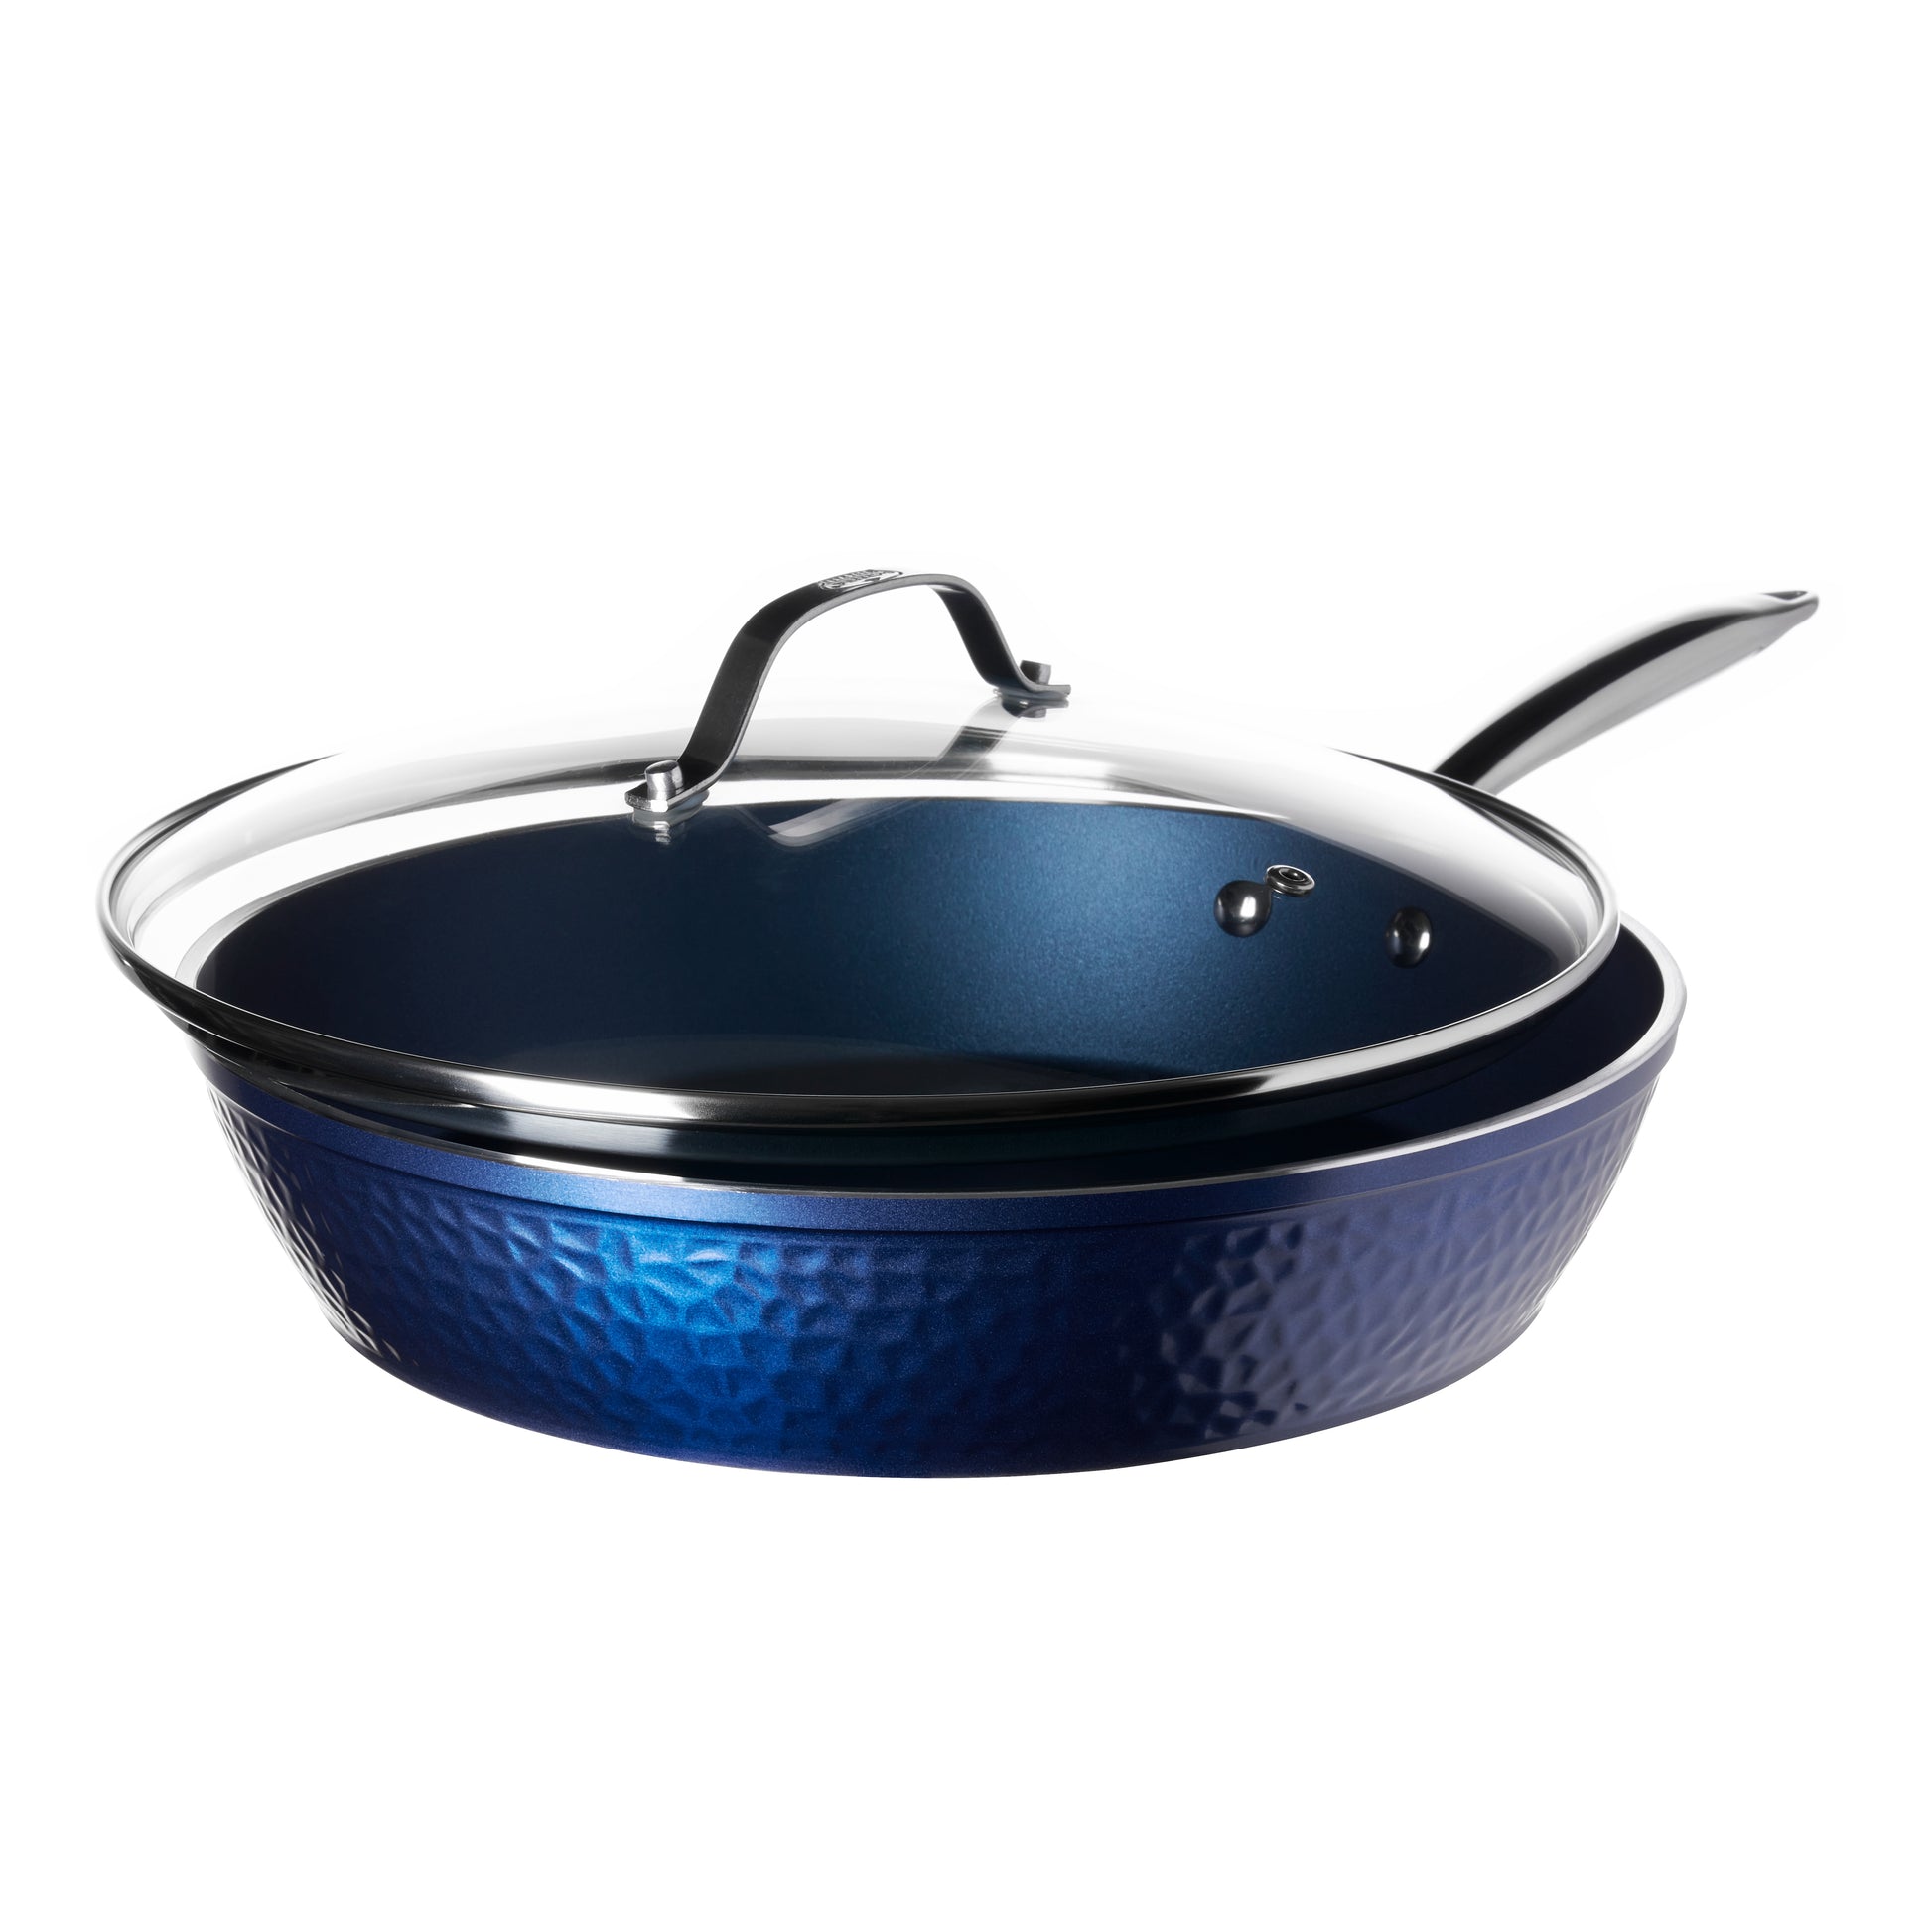 Nuwave 3-quart Grill Pan with Tempered Glass Lid, Forged Lightweight, G10  Healthy Duralon Blue Ceramic Ultra Non-Stick Coating, Oven and